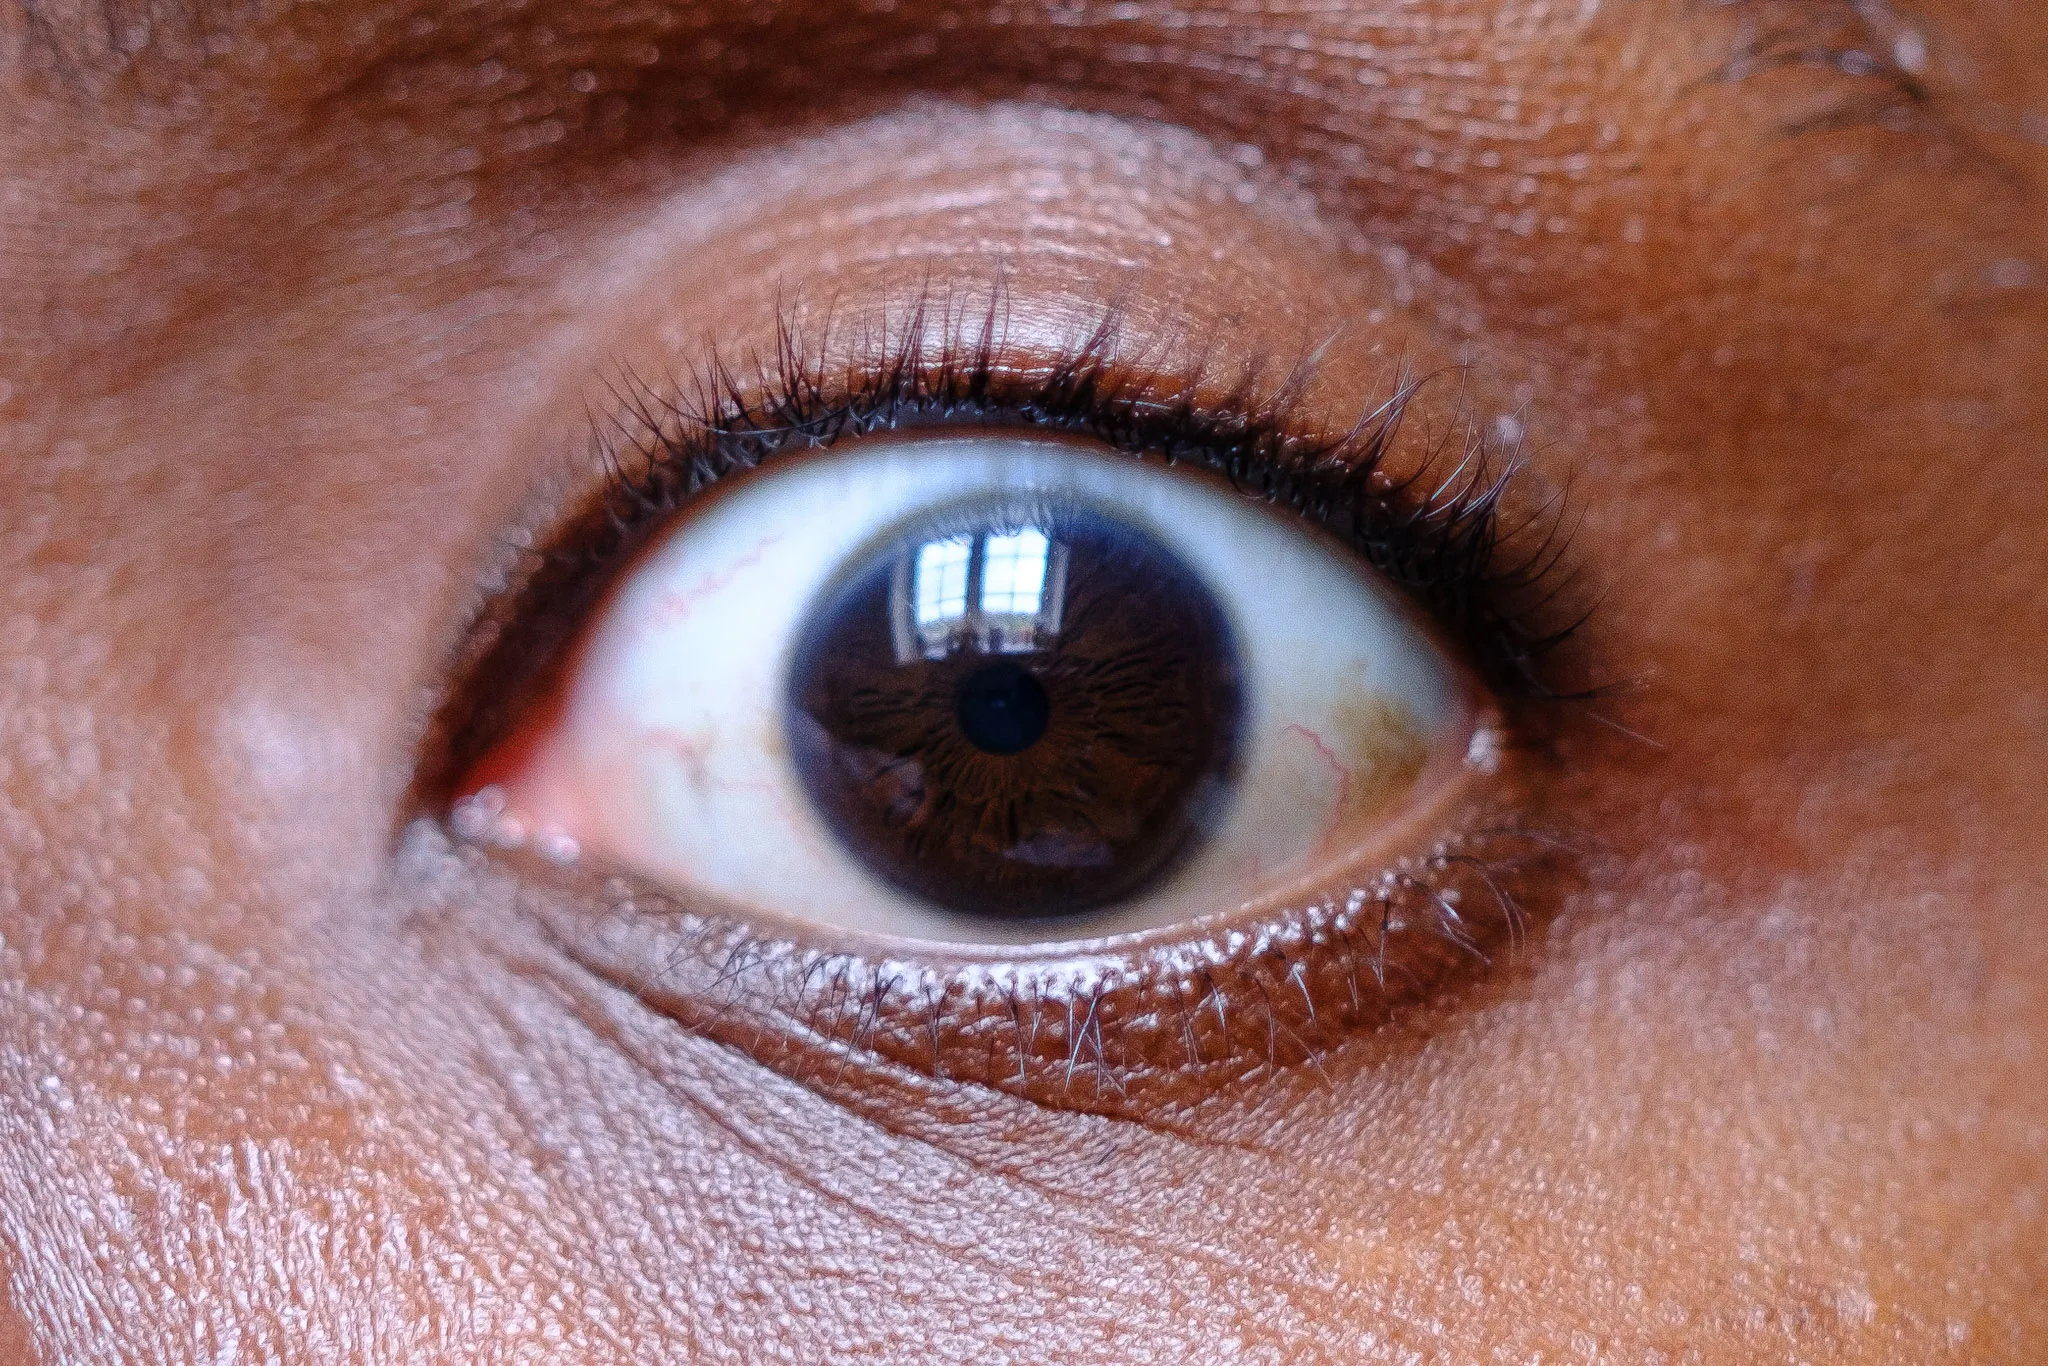 in focus, extremely detailed, wide open brown human eye and lashes.